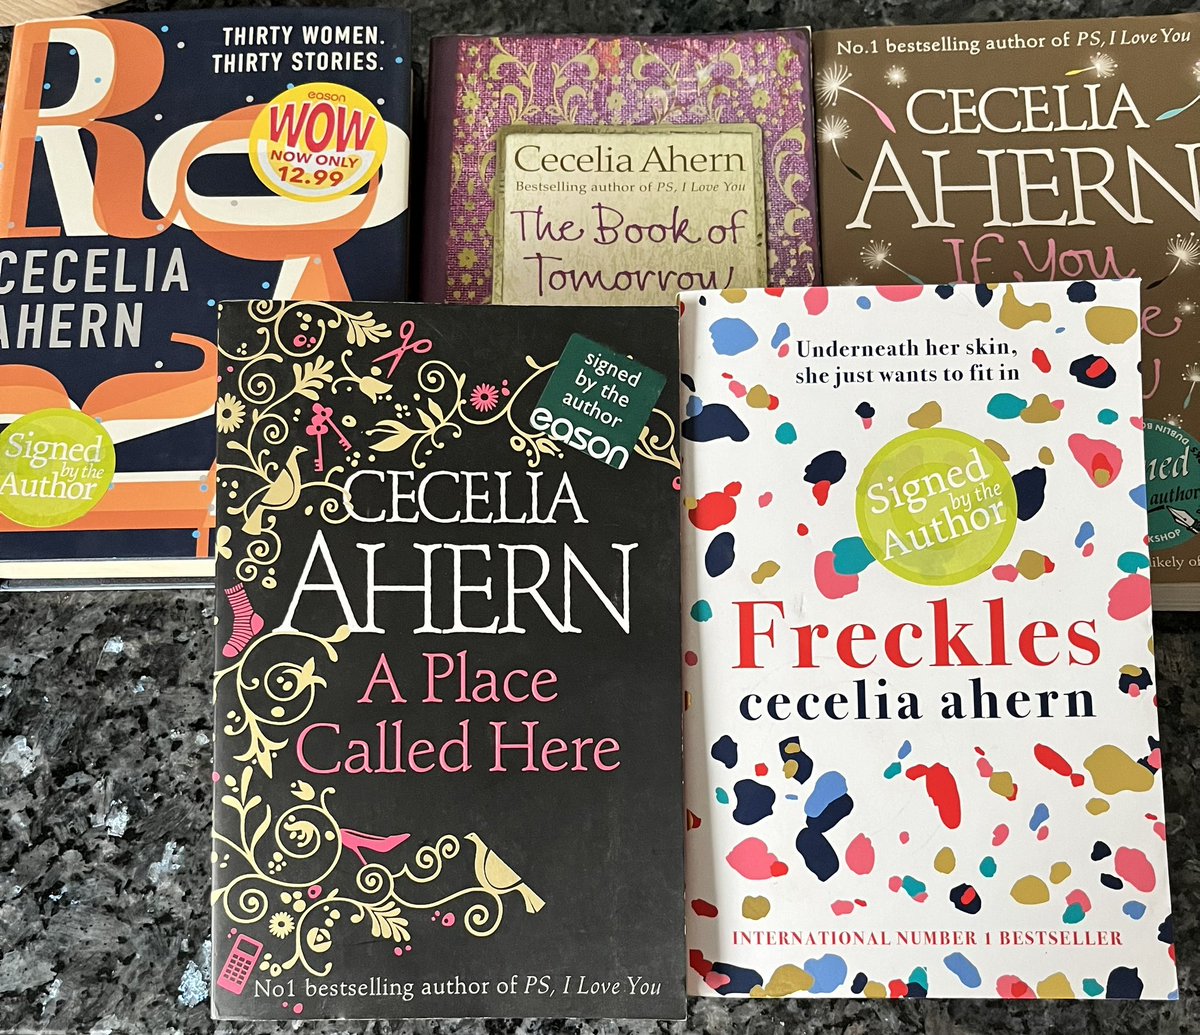 Won the most amazing prize with @TheBookshopIE this week.. all signed by @Cecelia_Ahern x keeping them safe for Lucie when she can read them! Reading is freedom x